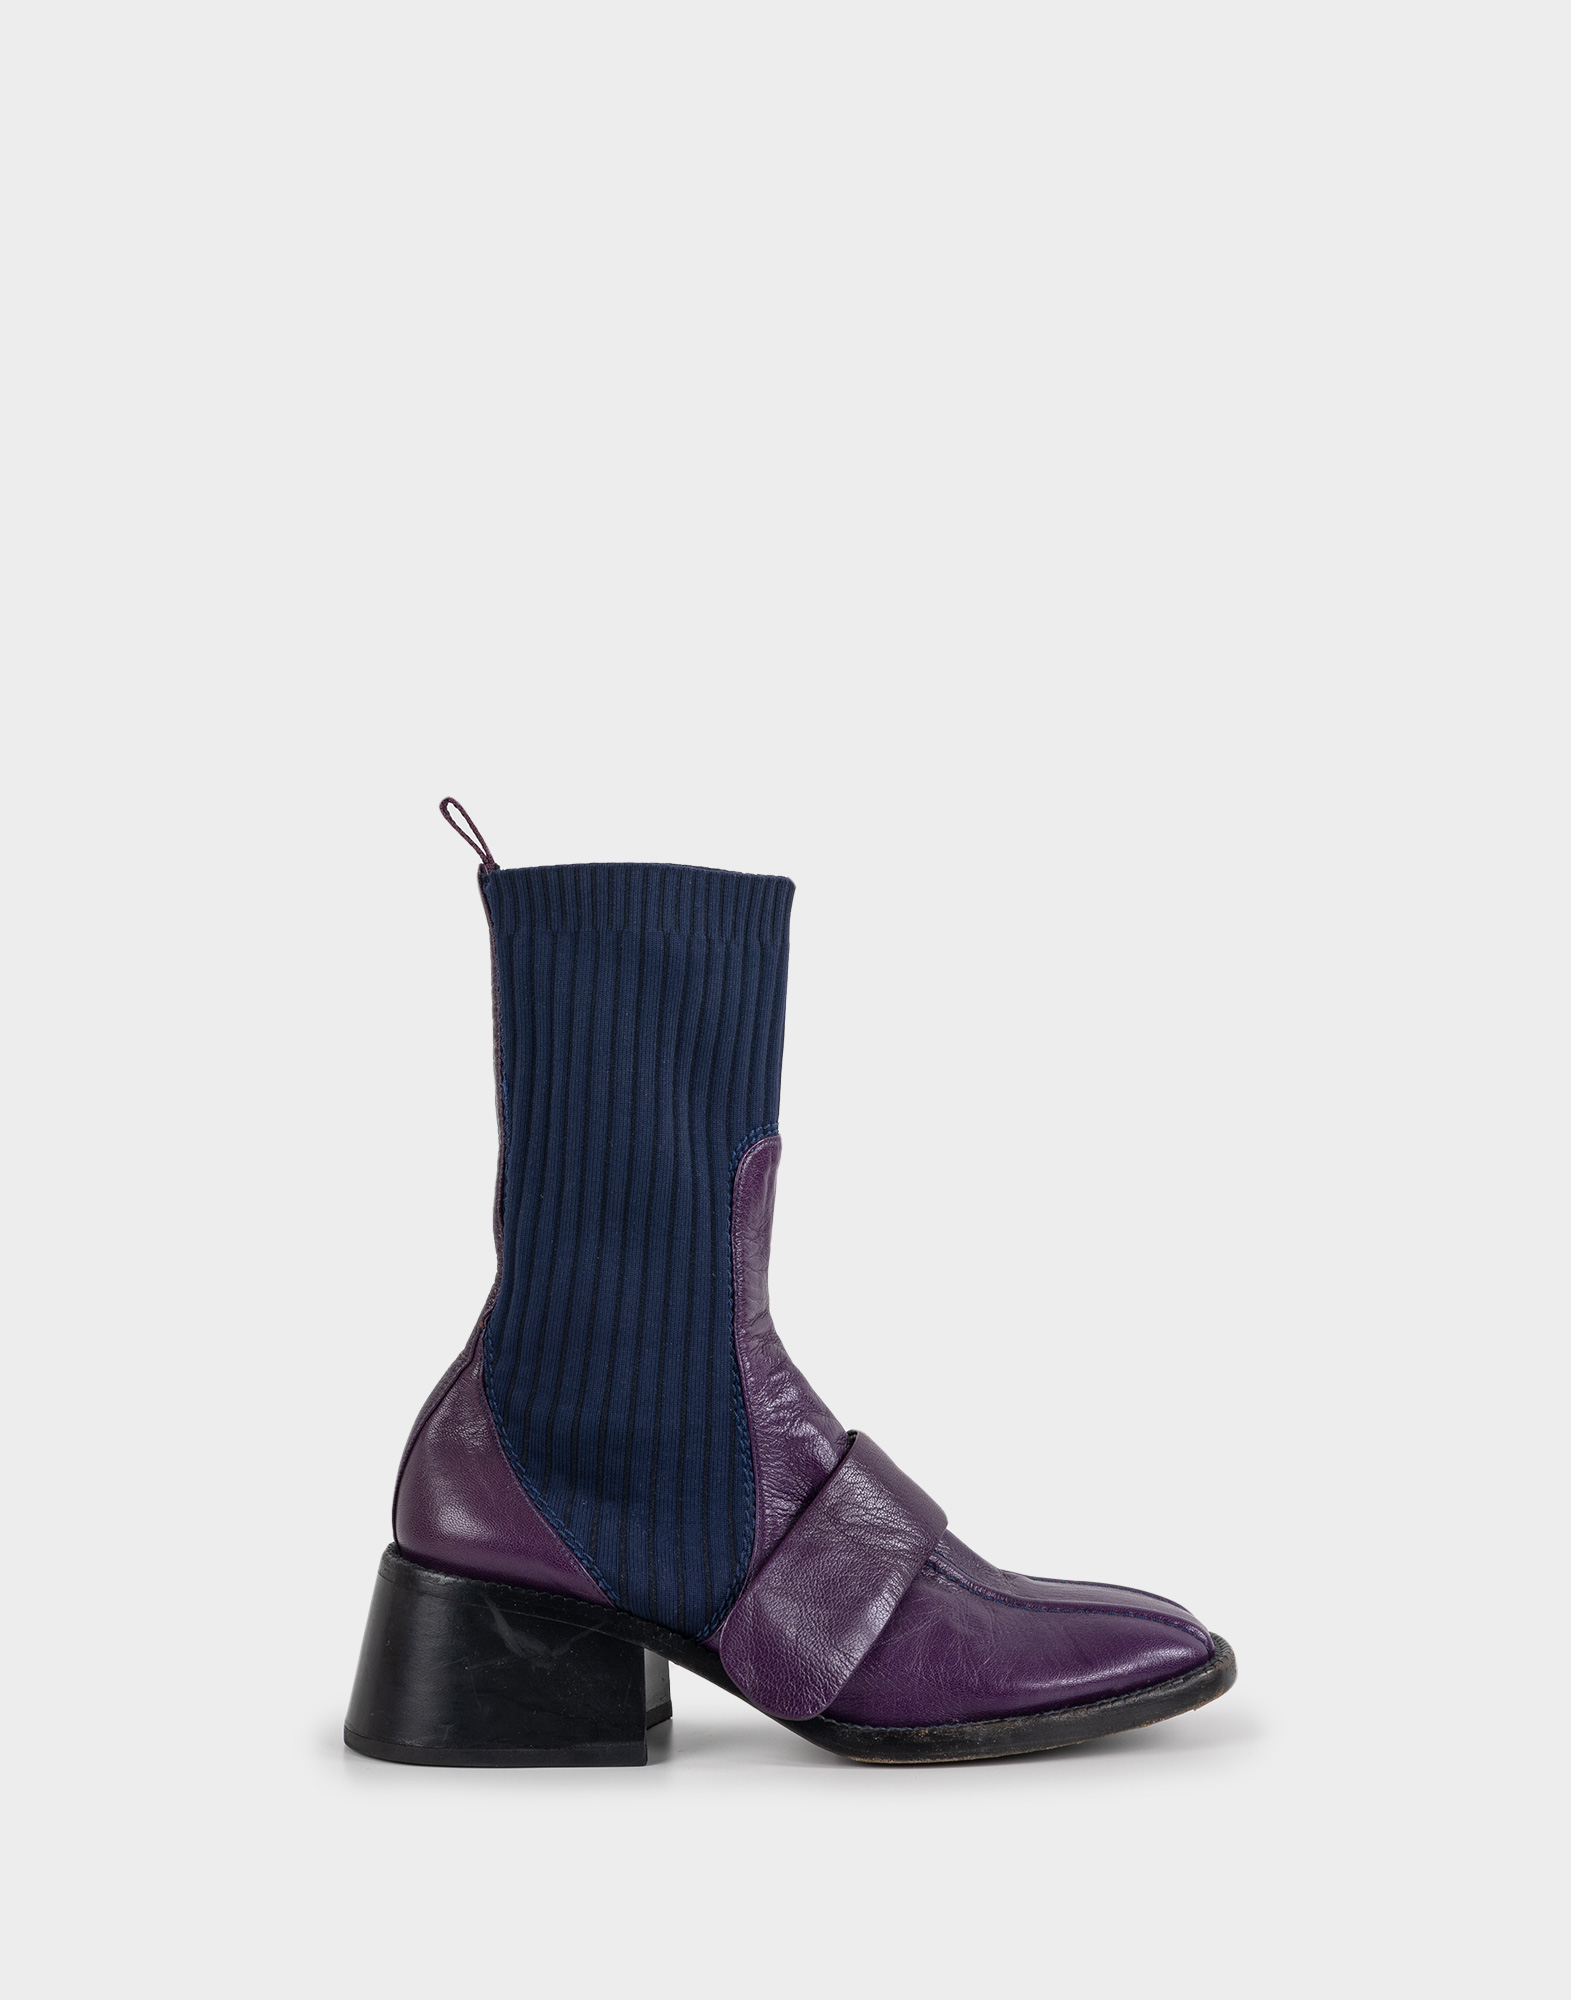 women's mid-calf ankle boots in purple calfskin with blue elastic, black heel